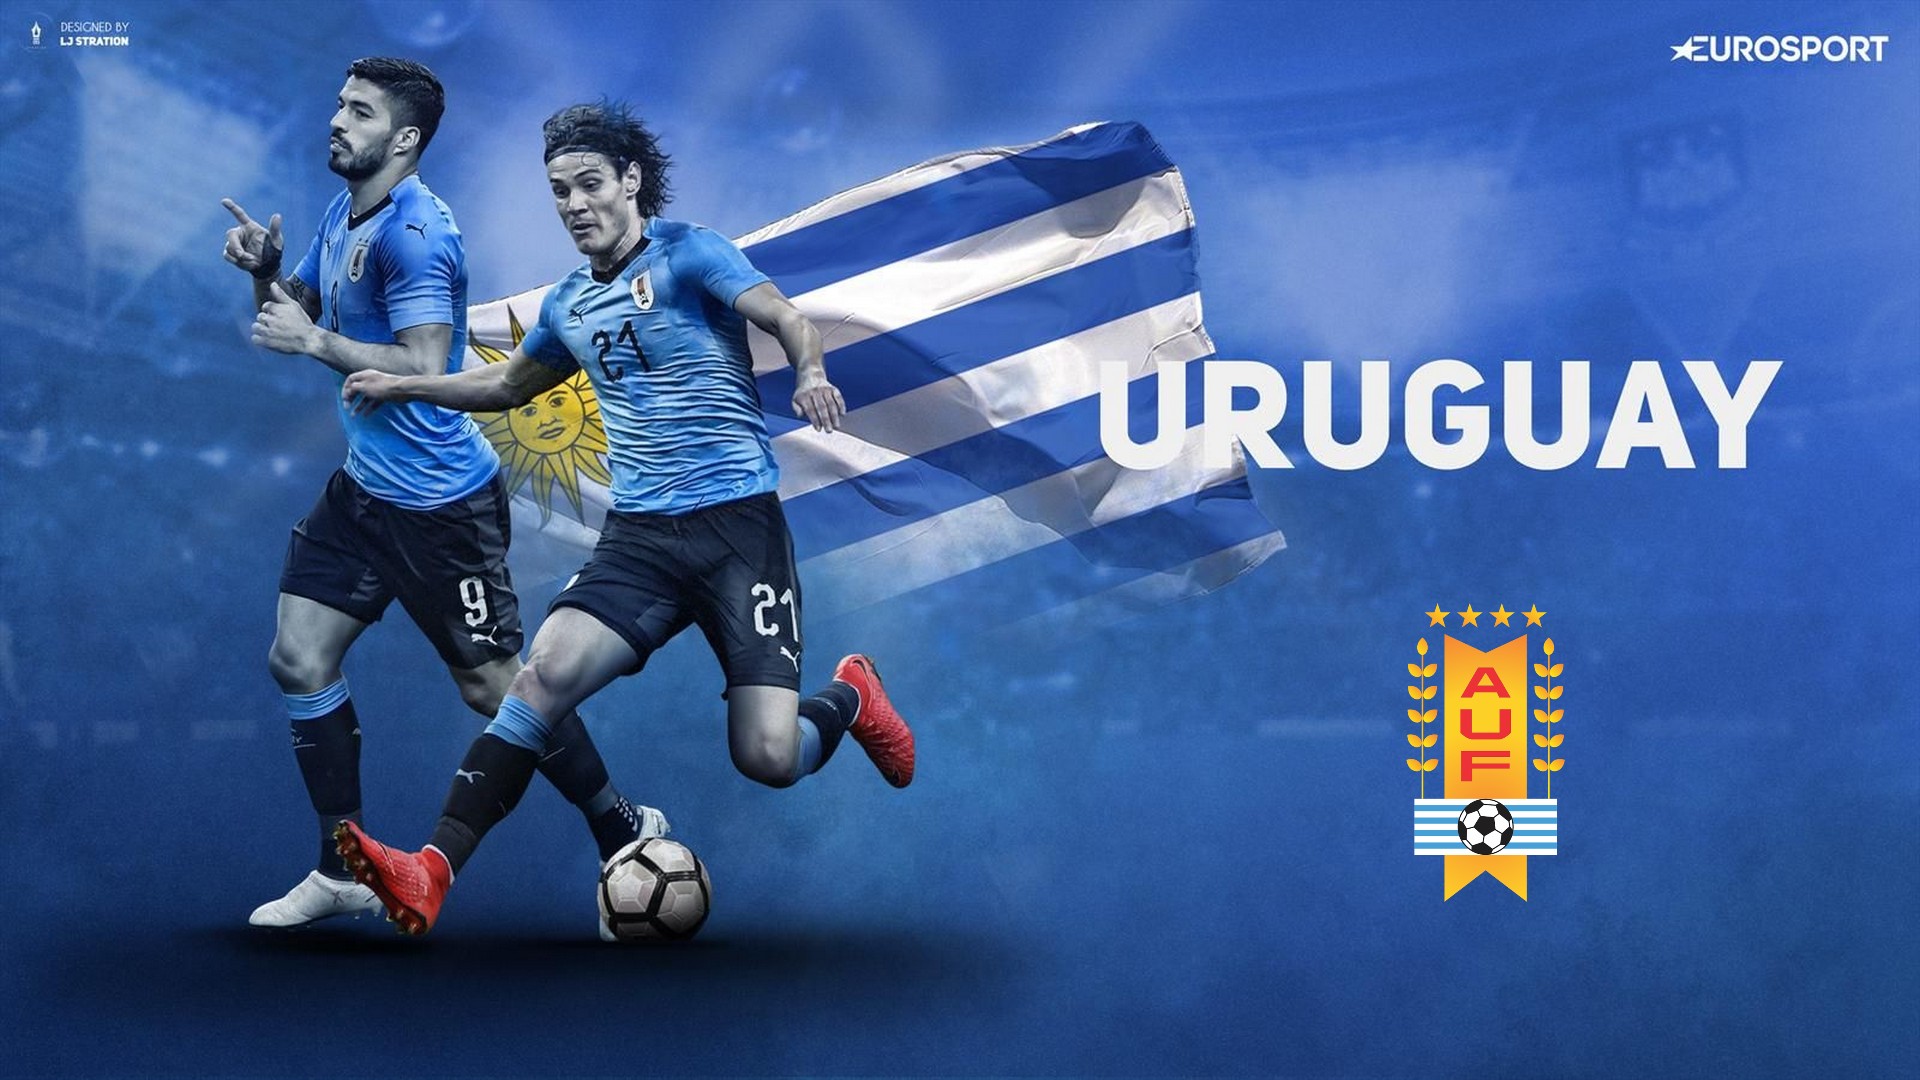 Uruguay Football Squad Wallpaper HD With Resolution 1920X1080 pixel. You can make this wallpaper for your Mac or Windows Desktop Background, iPhone, Android or Tablet and another Smartphone device for free